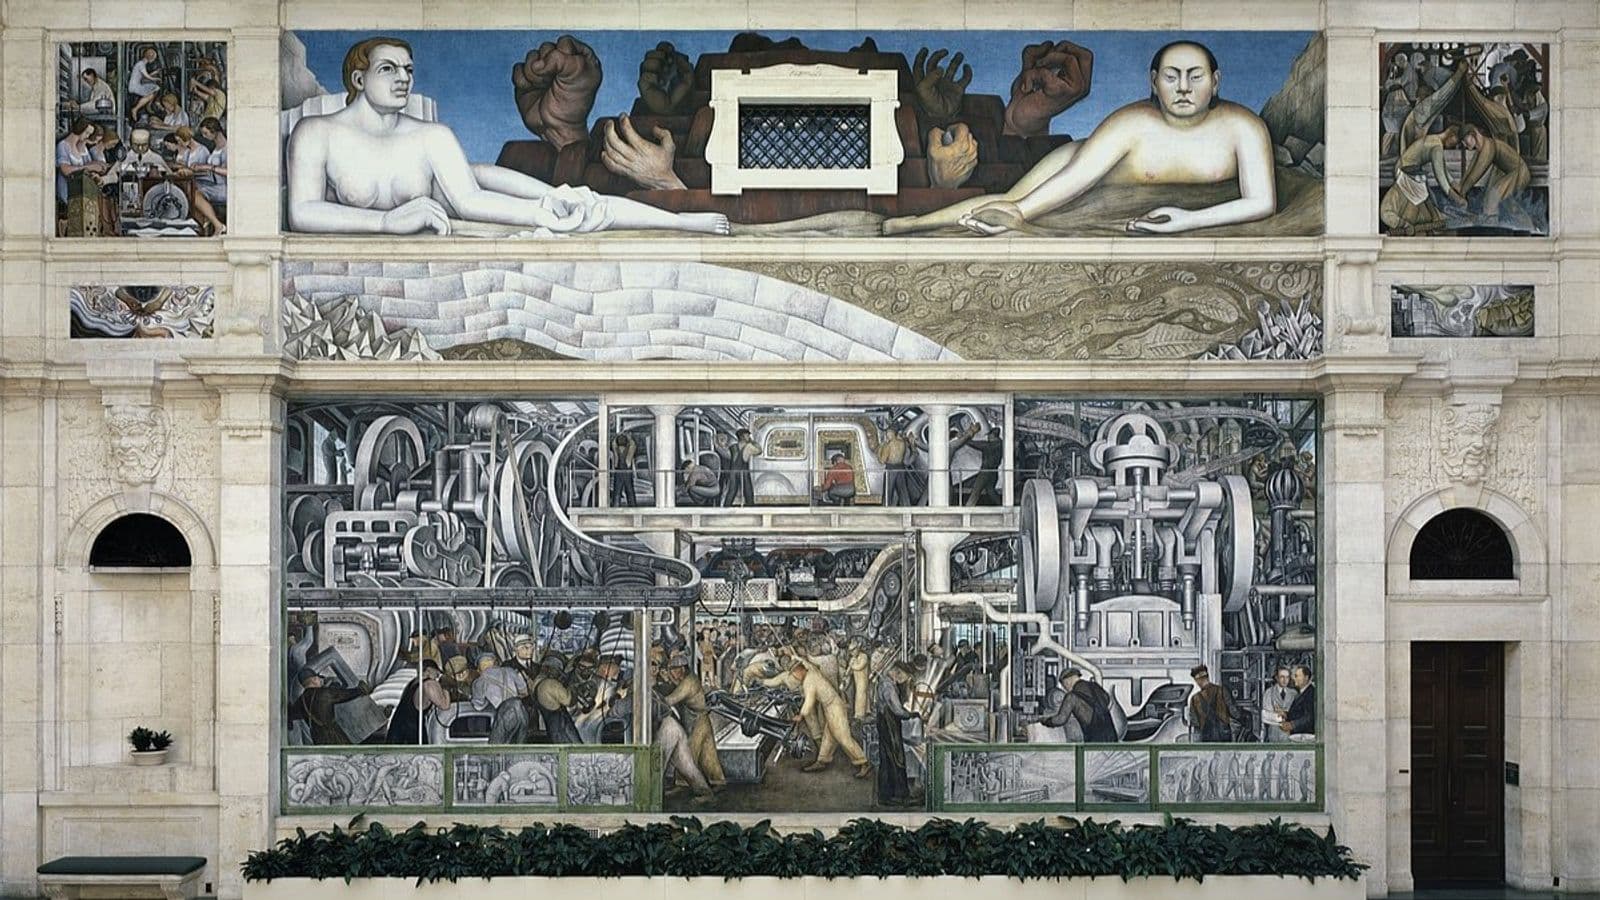 Detroit Industry, South Wall, Detroit Industry of the Arts, by Diego Rivera.  